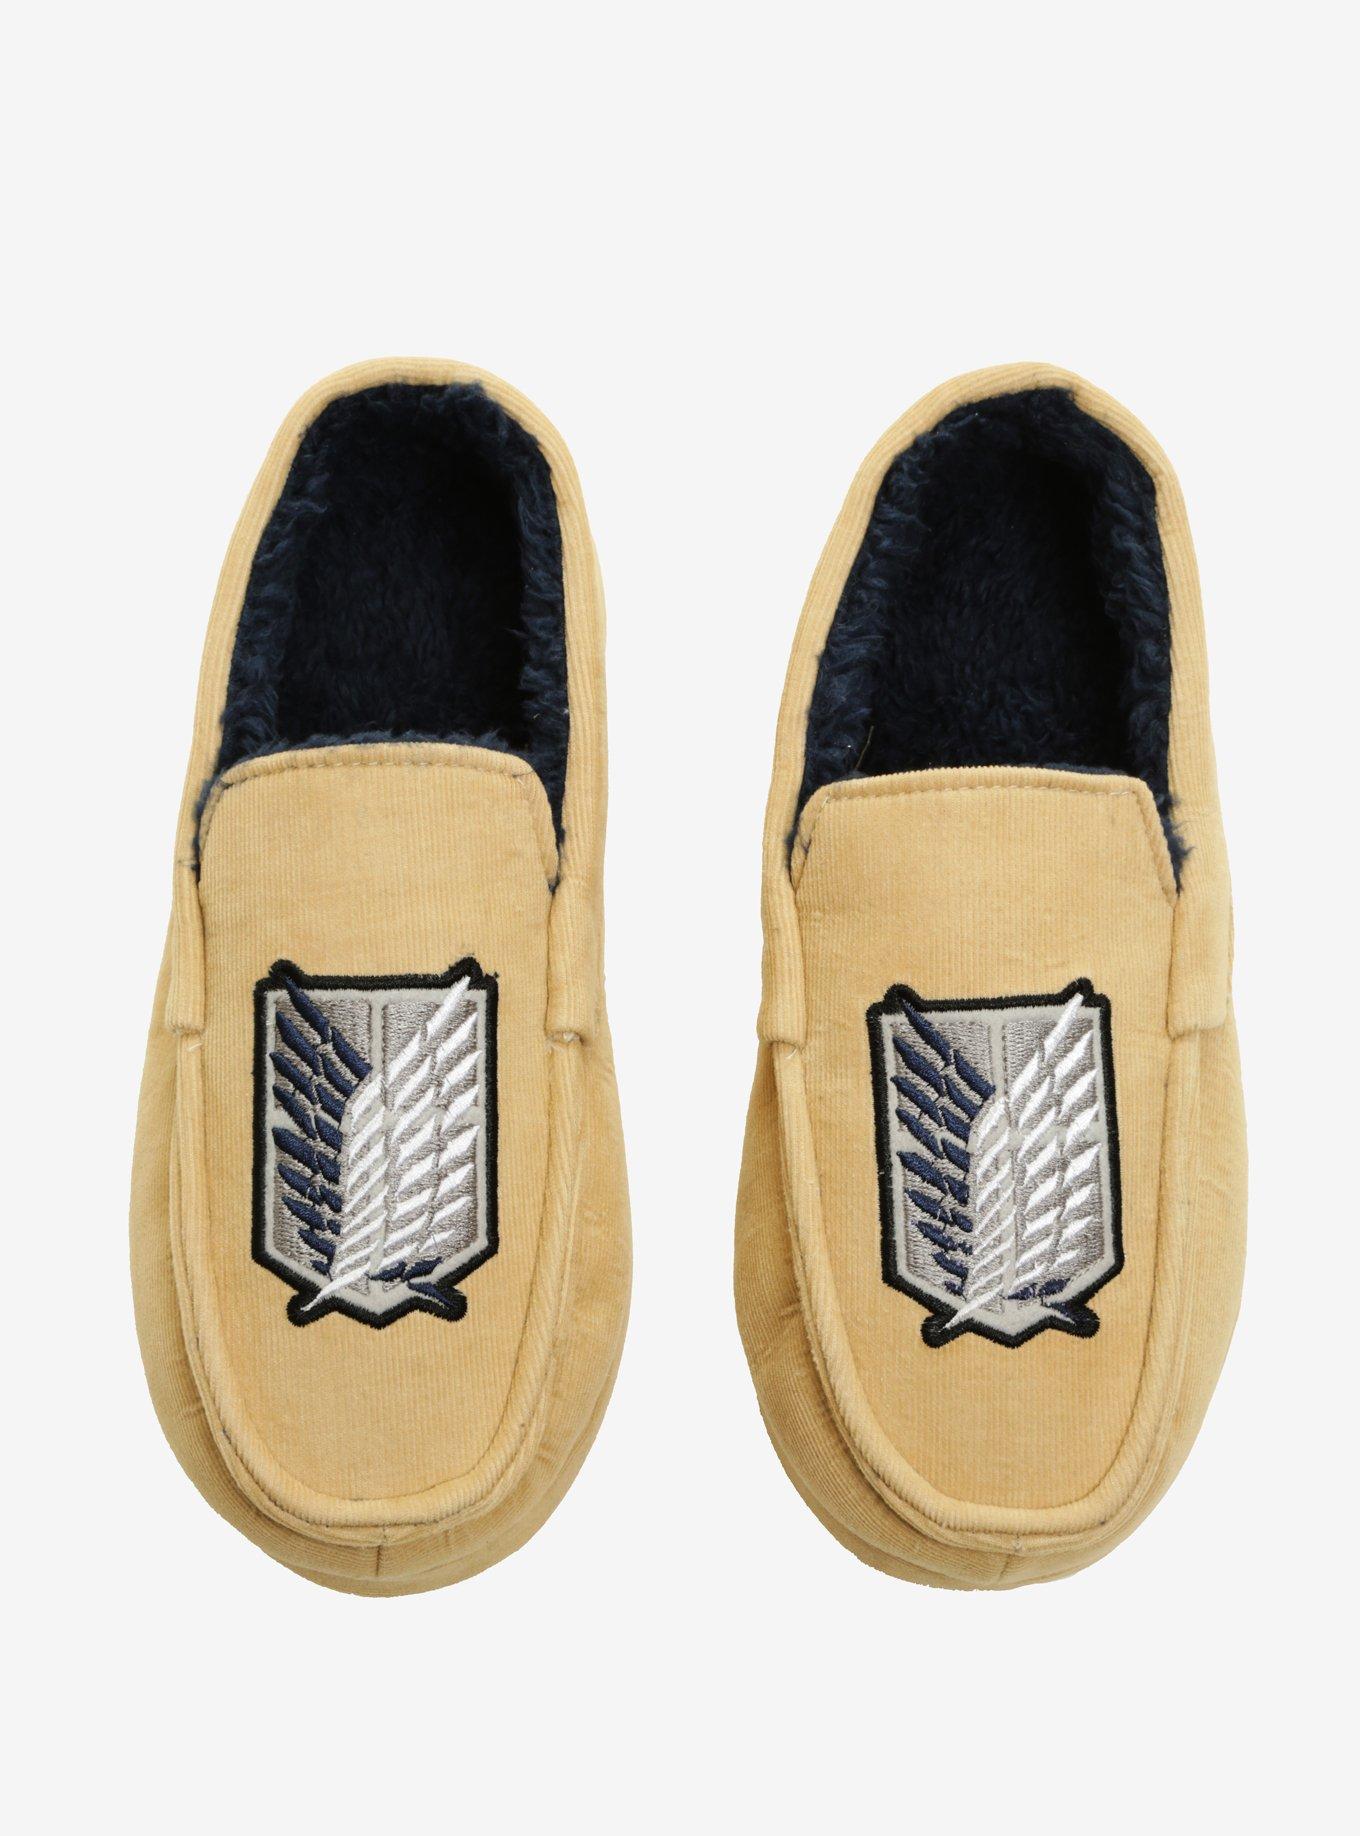 Attack On Titan Corduroy Moccasin Slippers, BROWN, hi-res